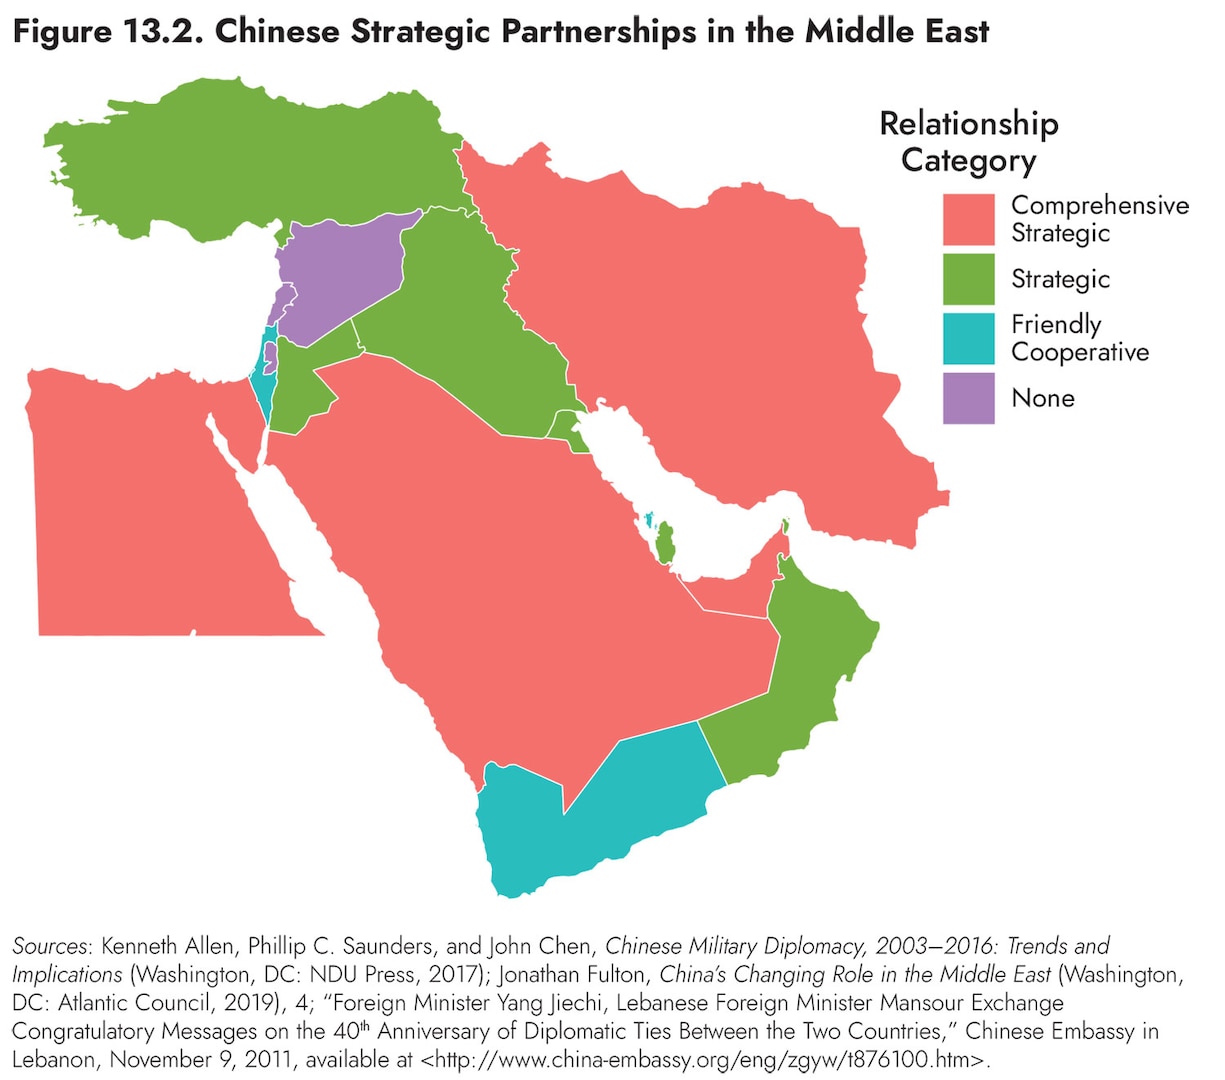 Figure 13.2. Chinese Strategic Partnerships in the Middle East